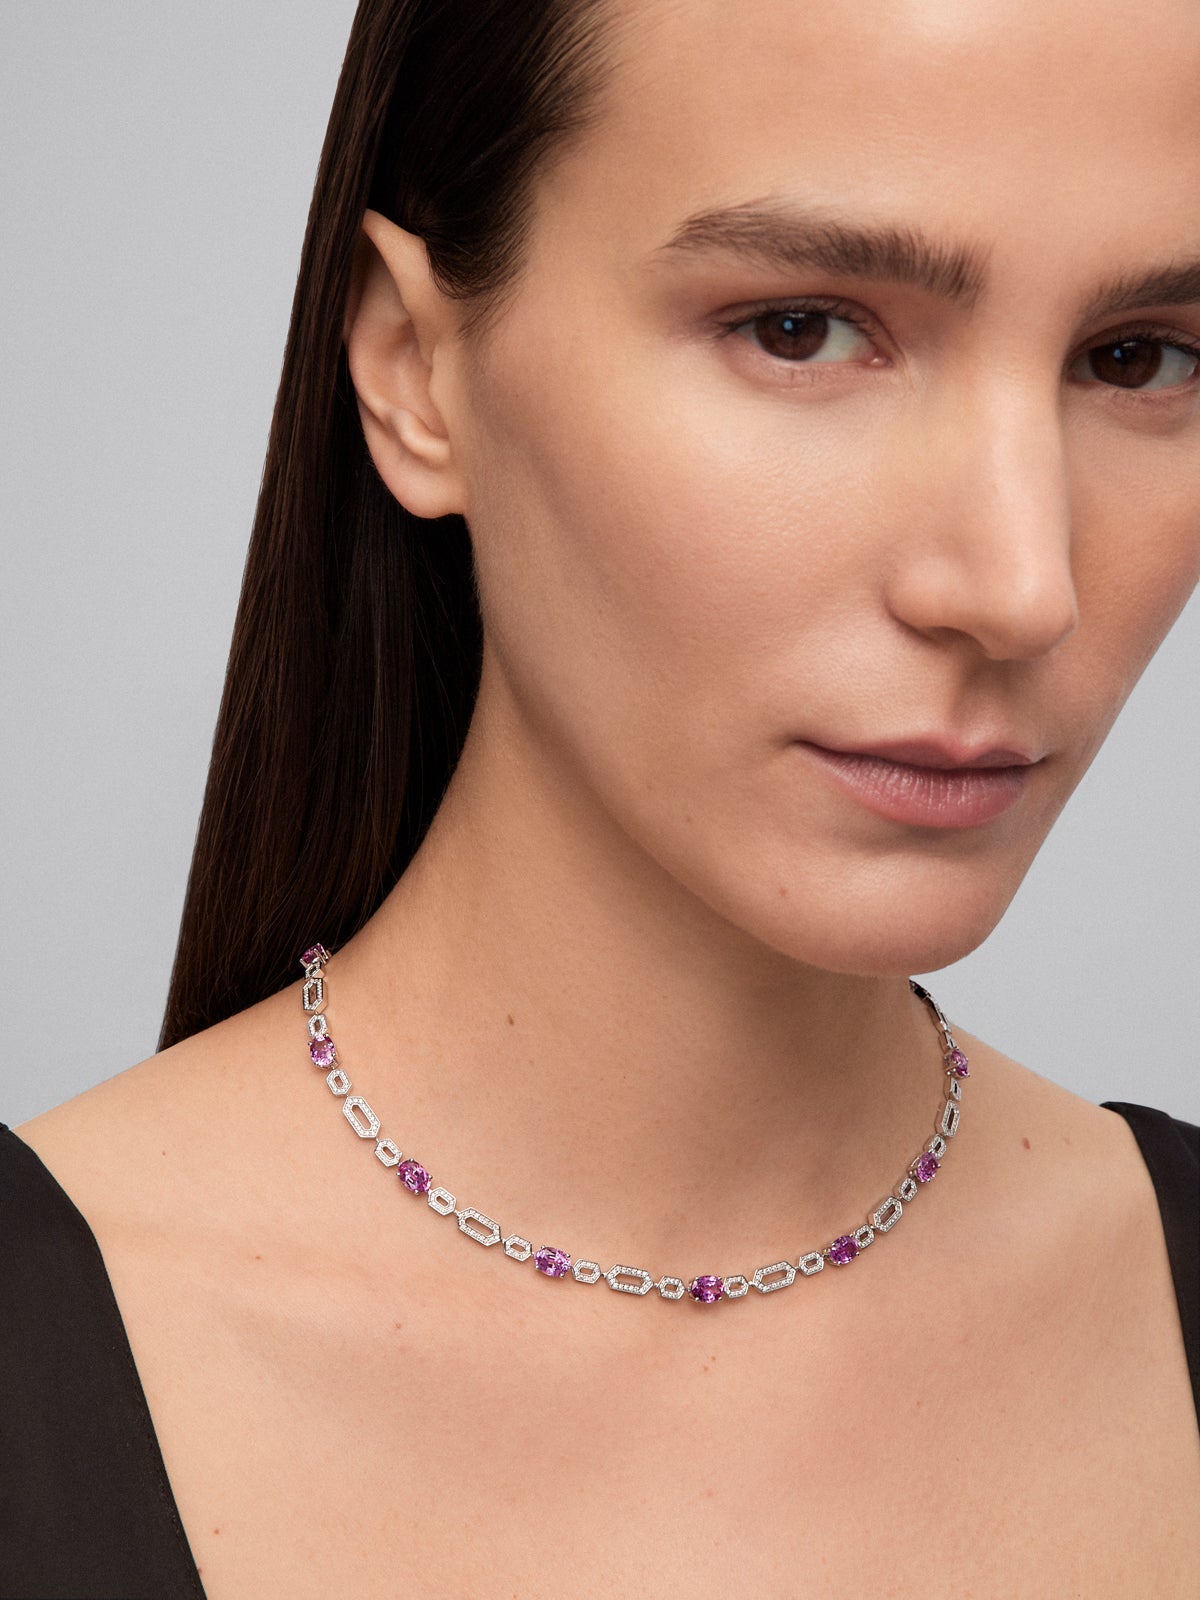 18K white gold necklace with 13 oval-cut vivid pink sapphires with a total of 14.43 cts and 572 brilliant-cut diamonds with a total of 1.73 cts